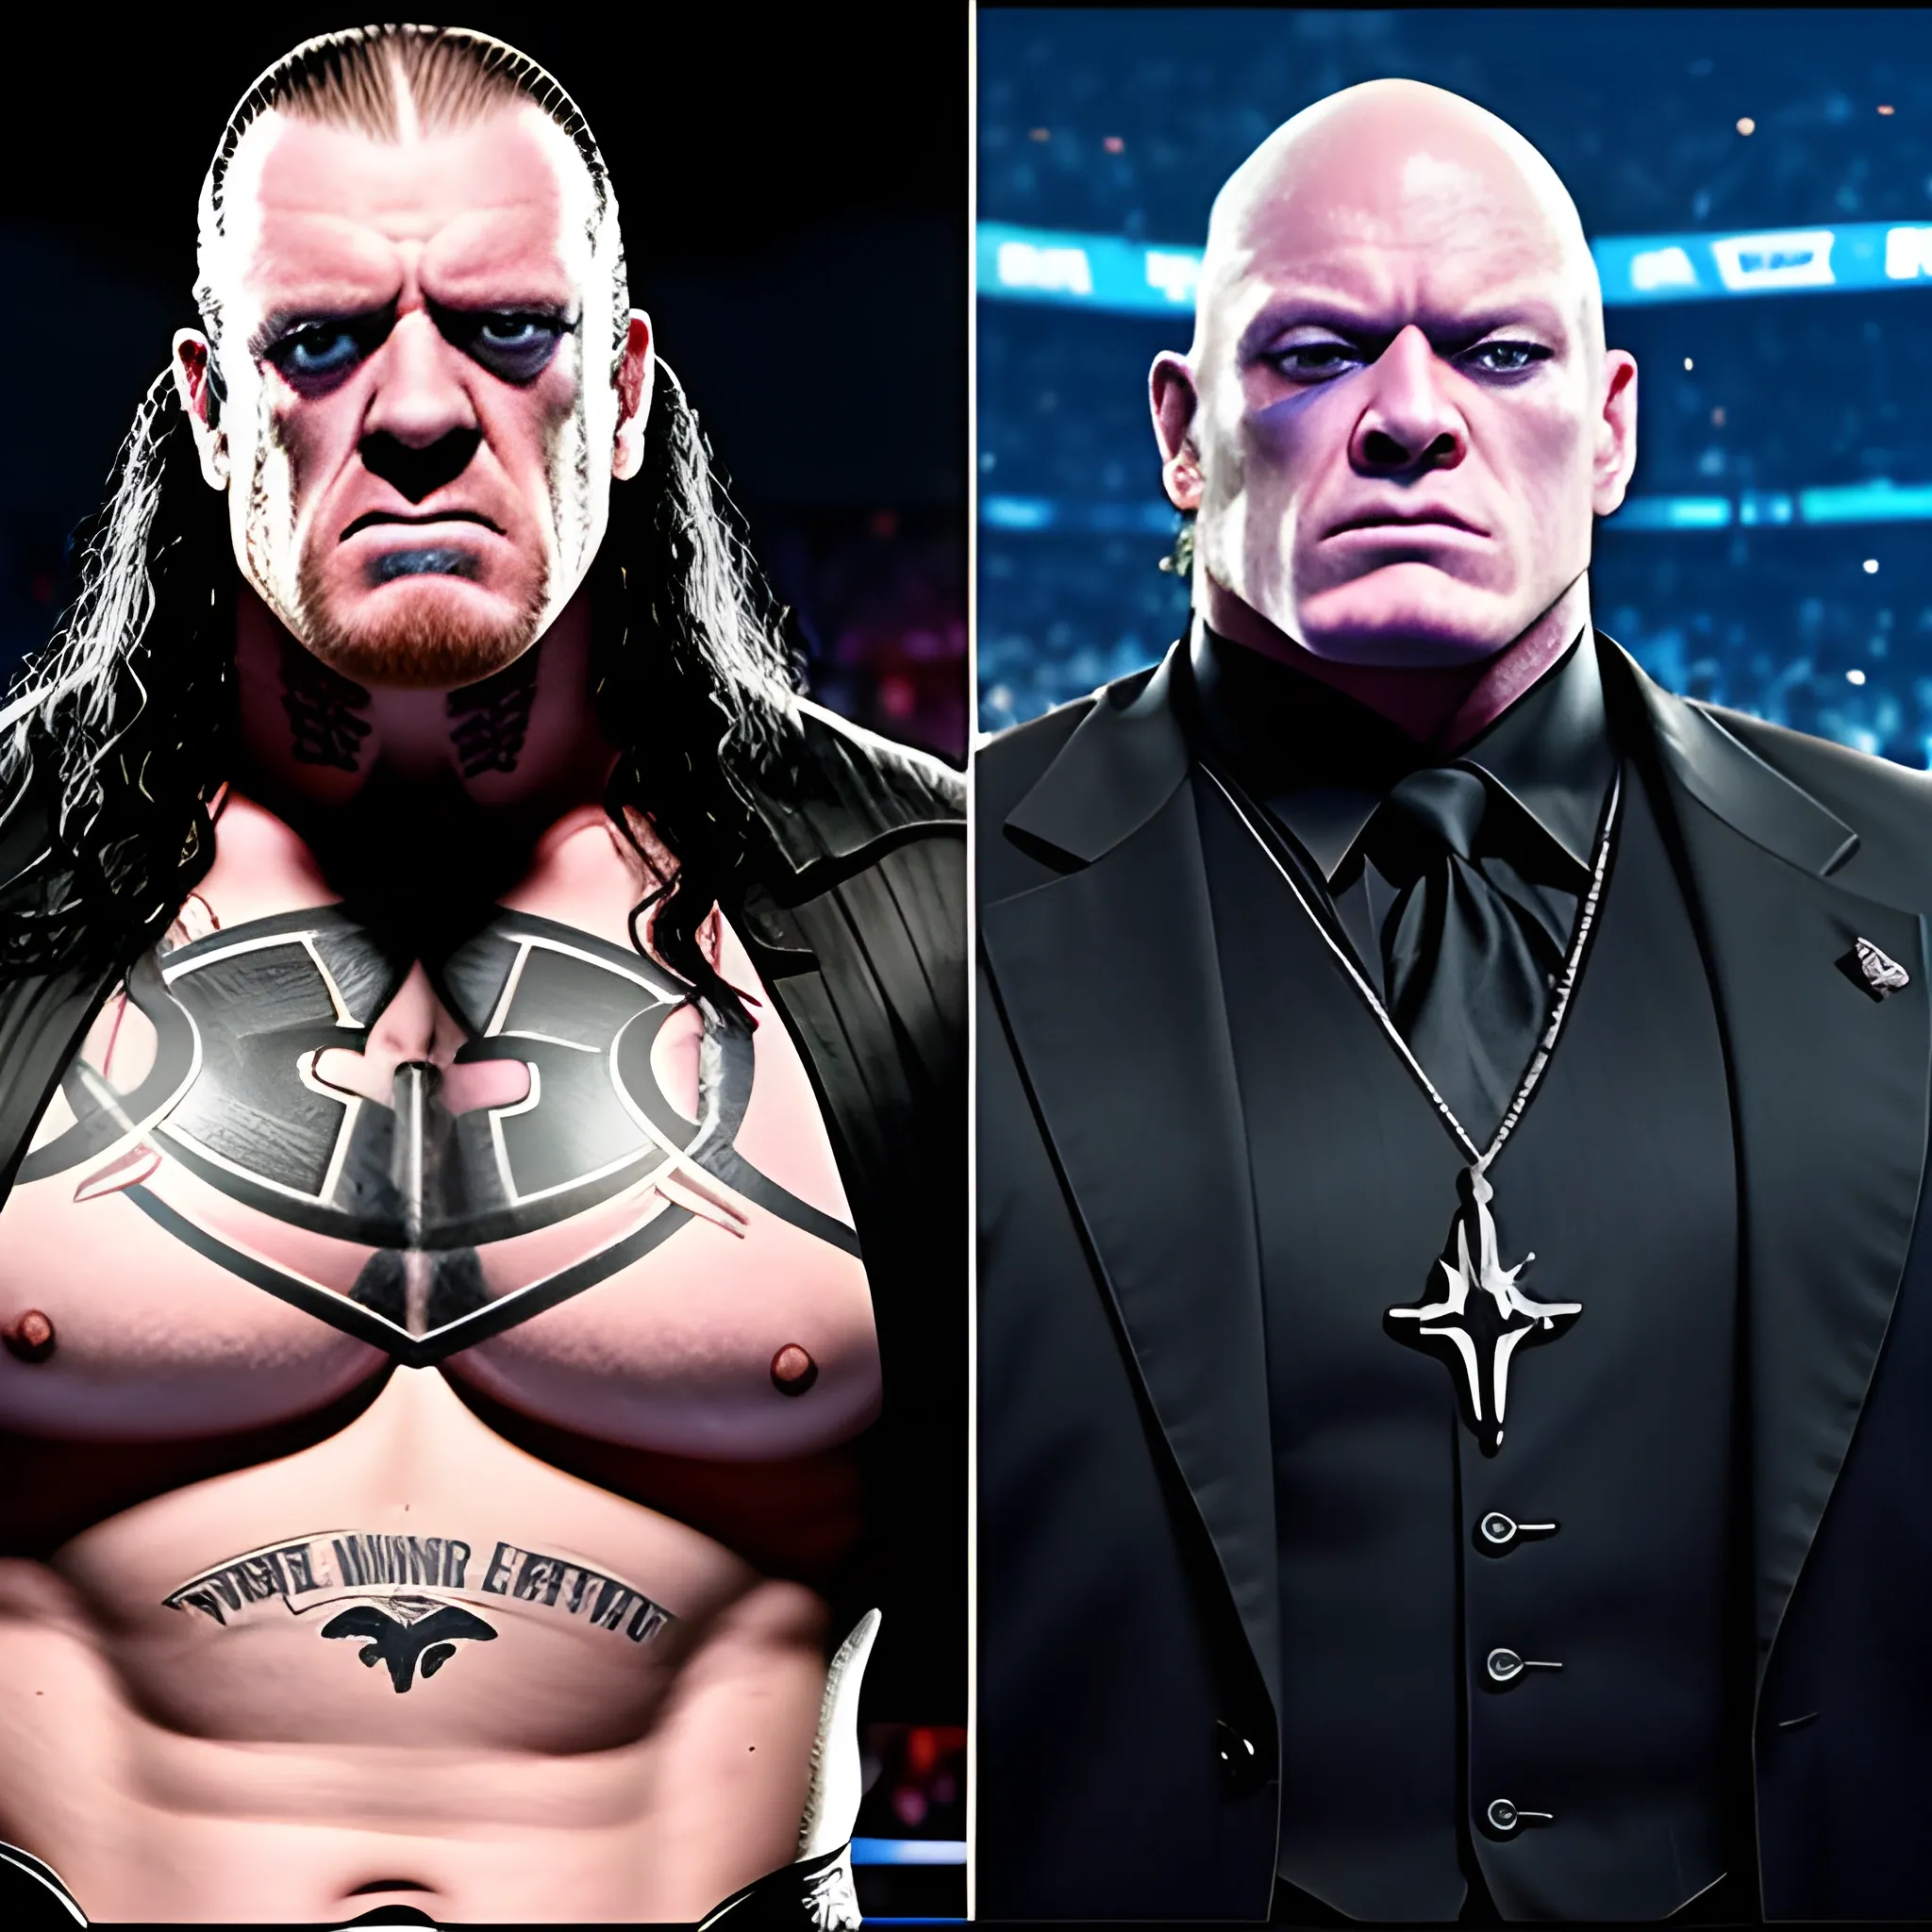 undertaker stands one side and brock lesnar with 21 wwe champions stands another side and the number like 21-0 shows on screen that shows the power of the undertaker